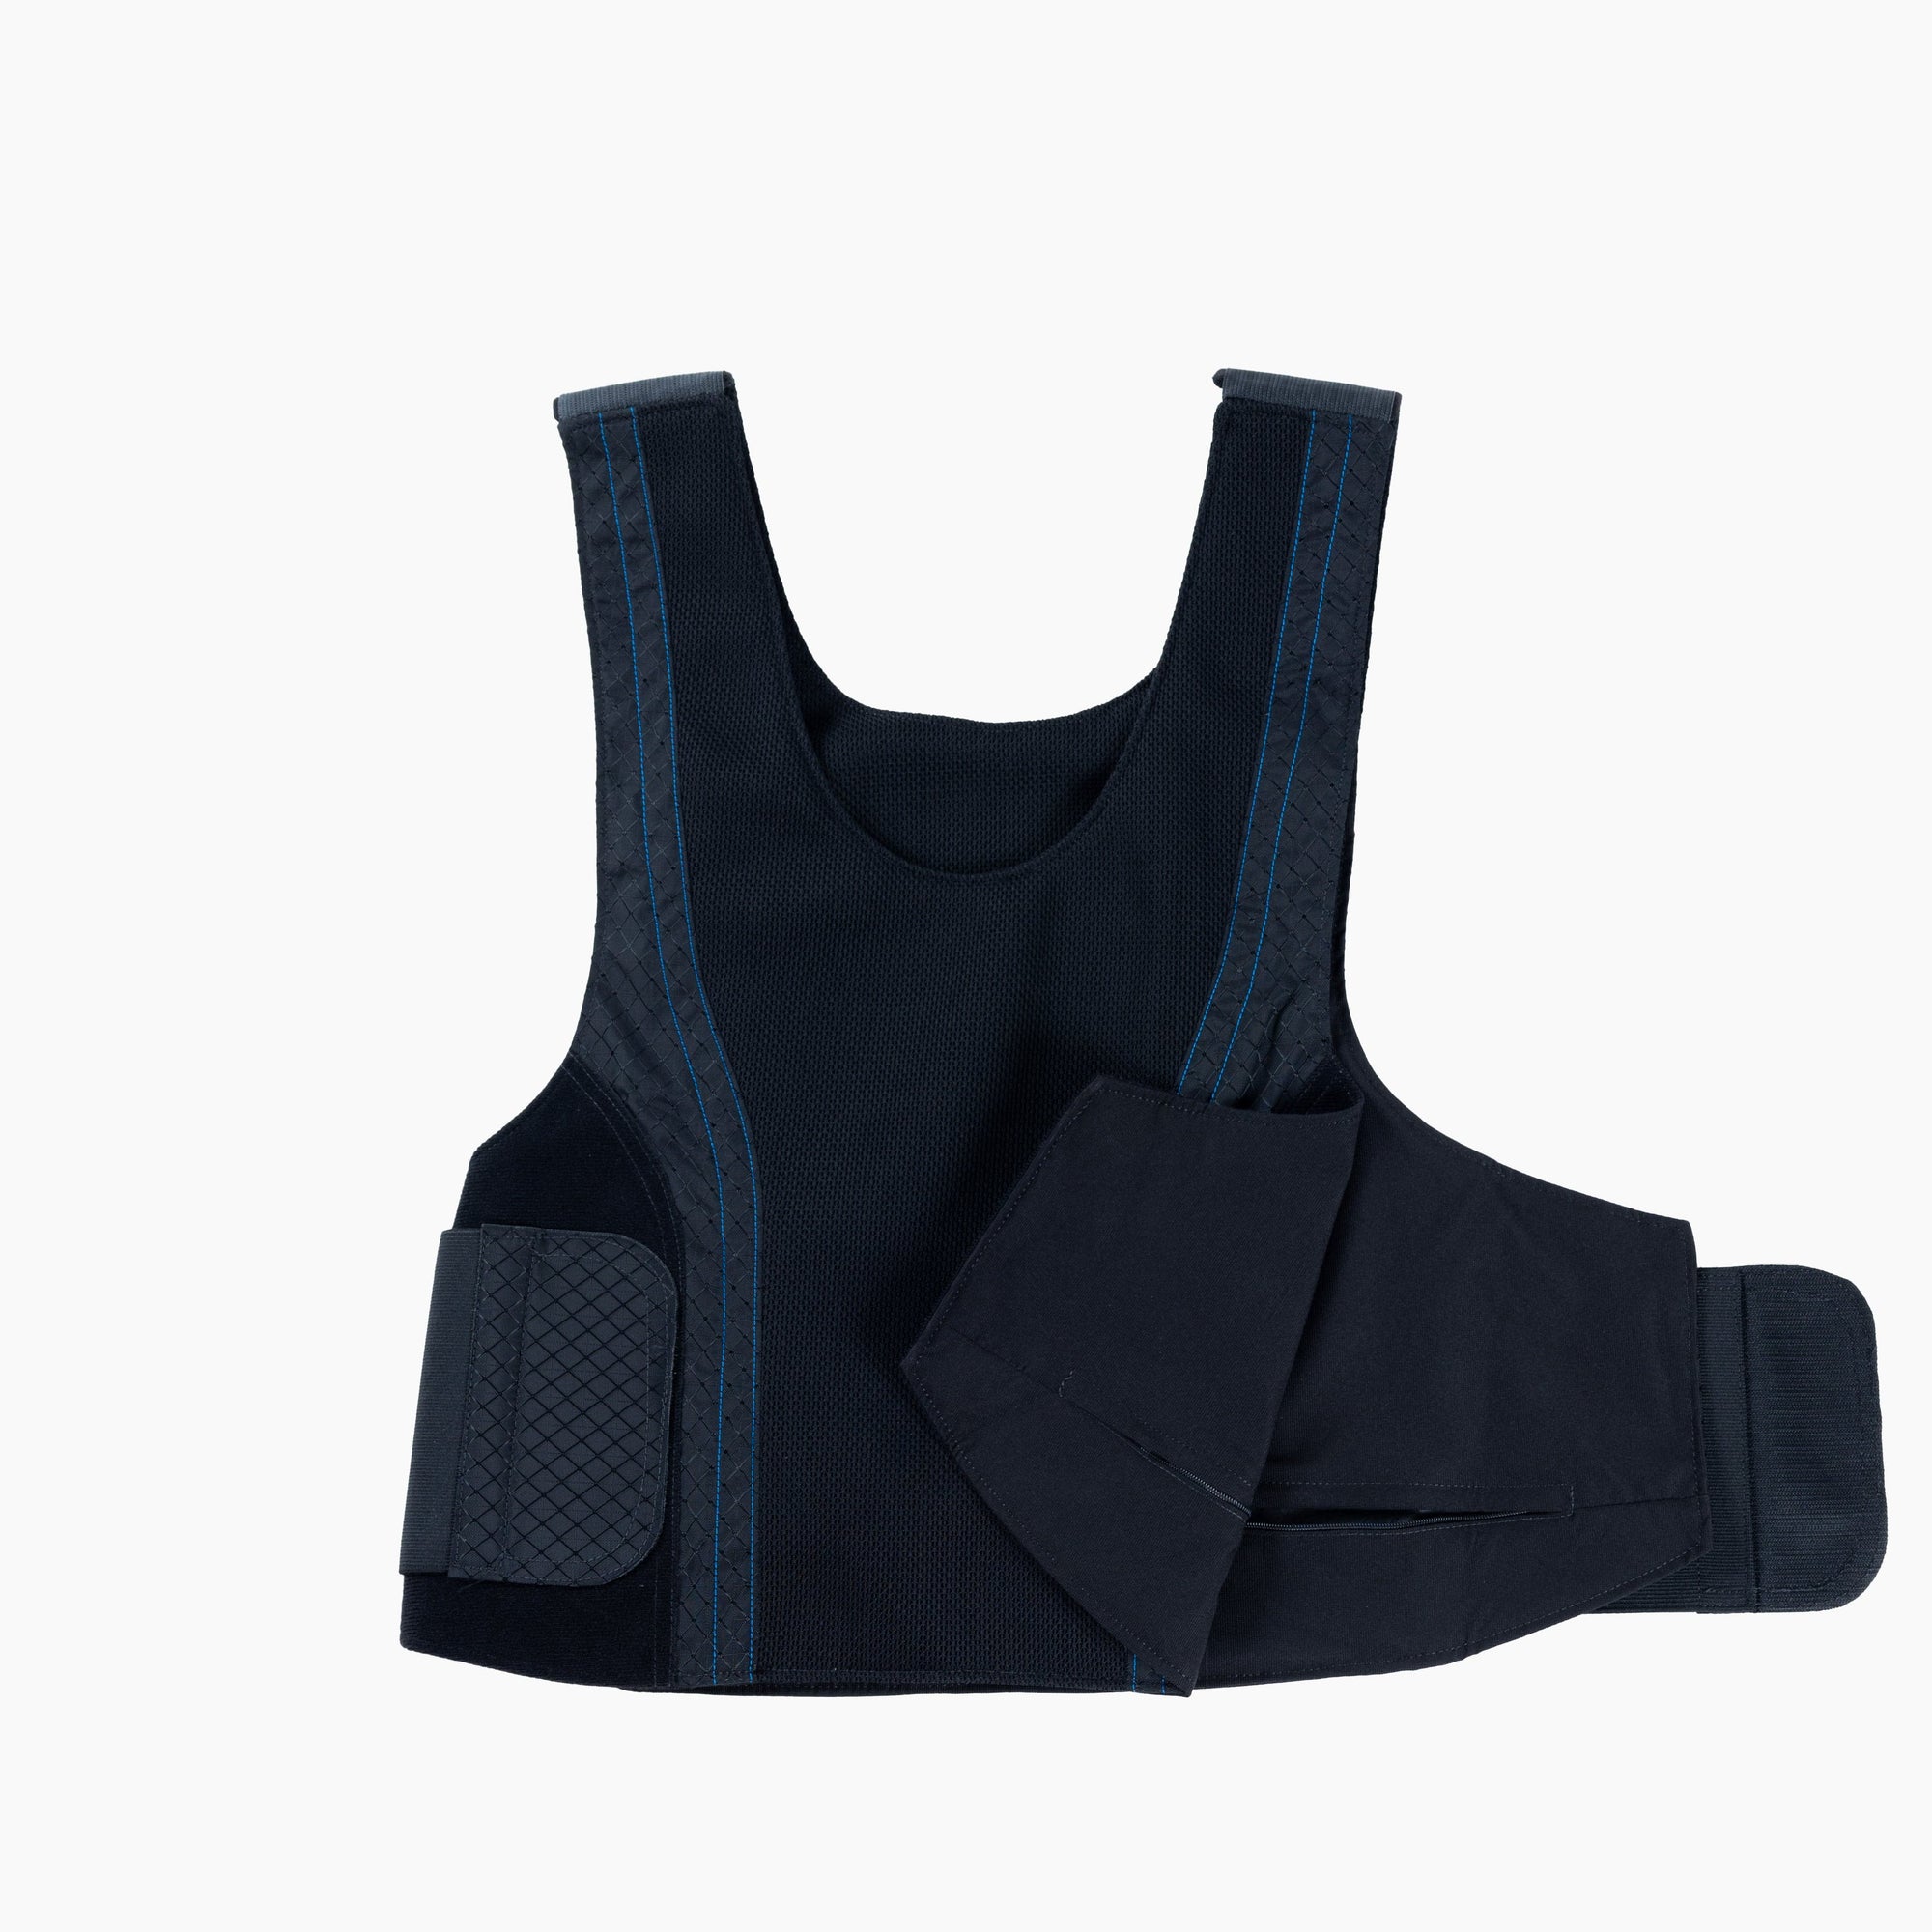 Concealable Armor Vest - Carrier Only